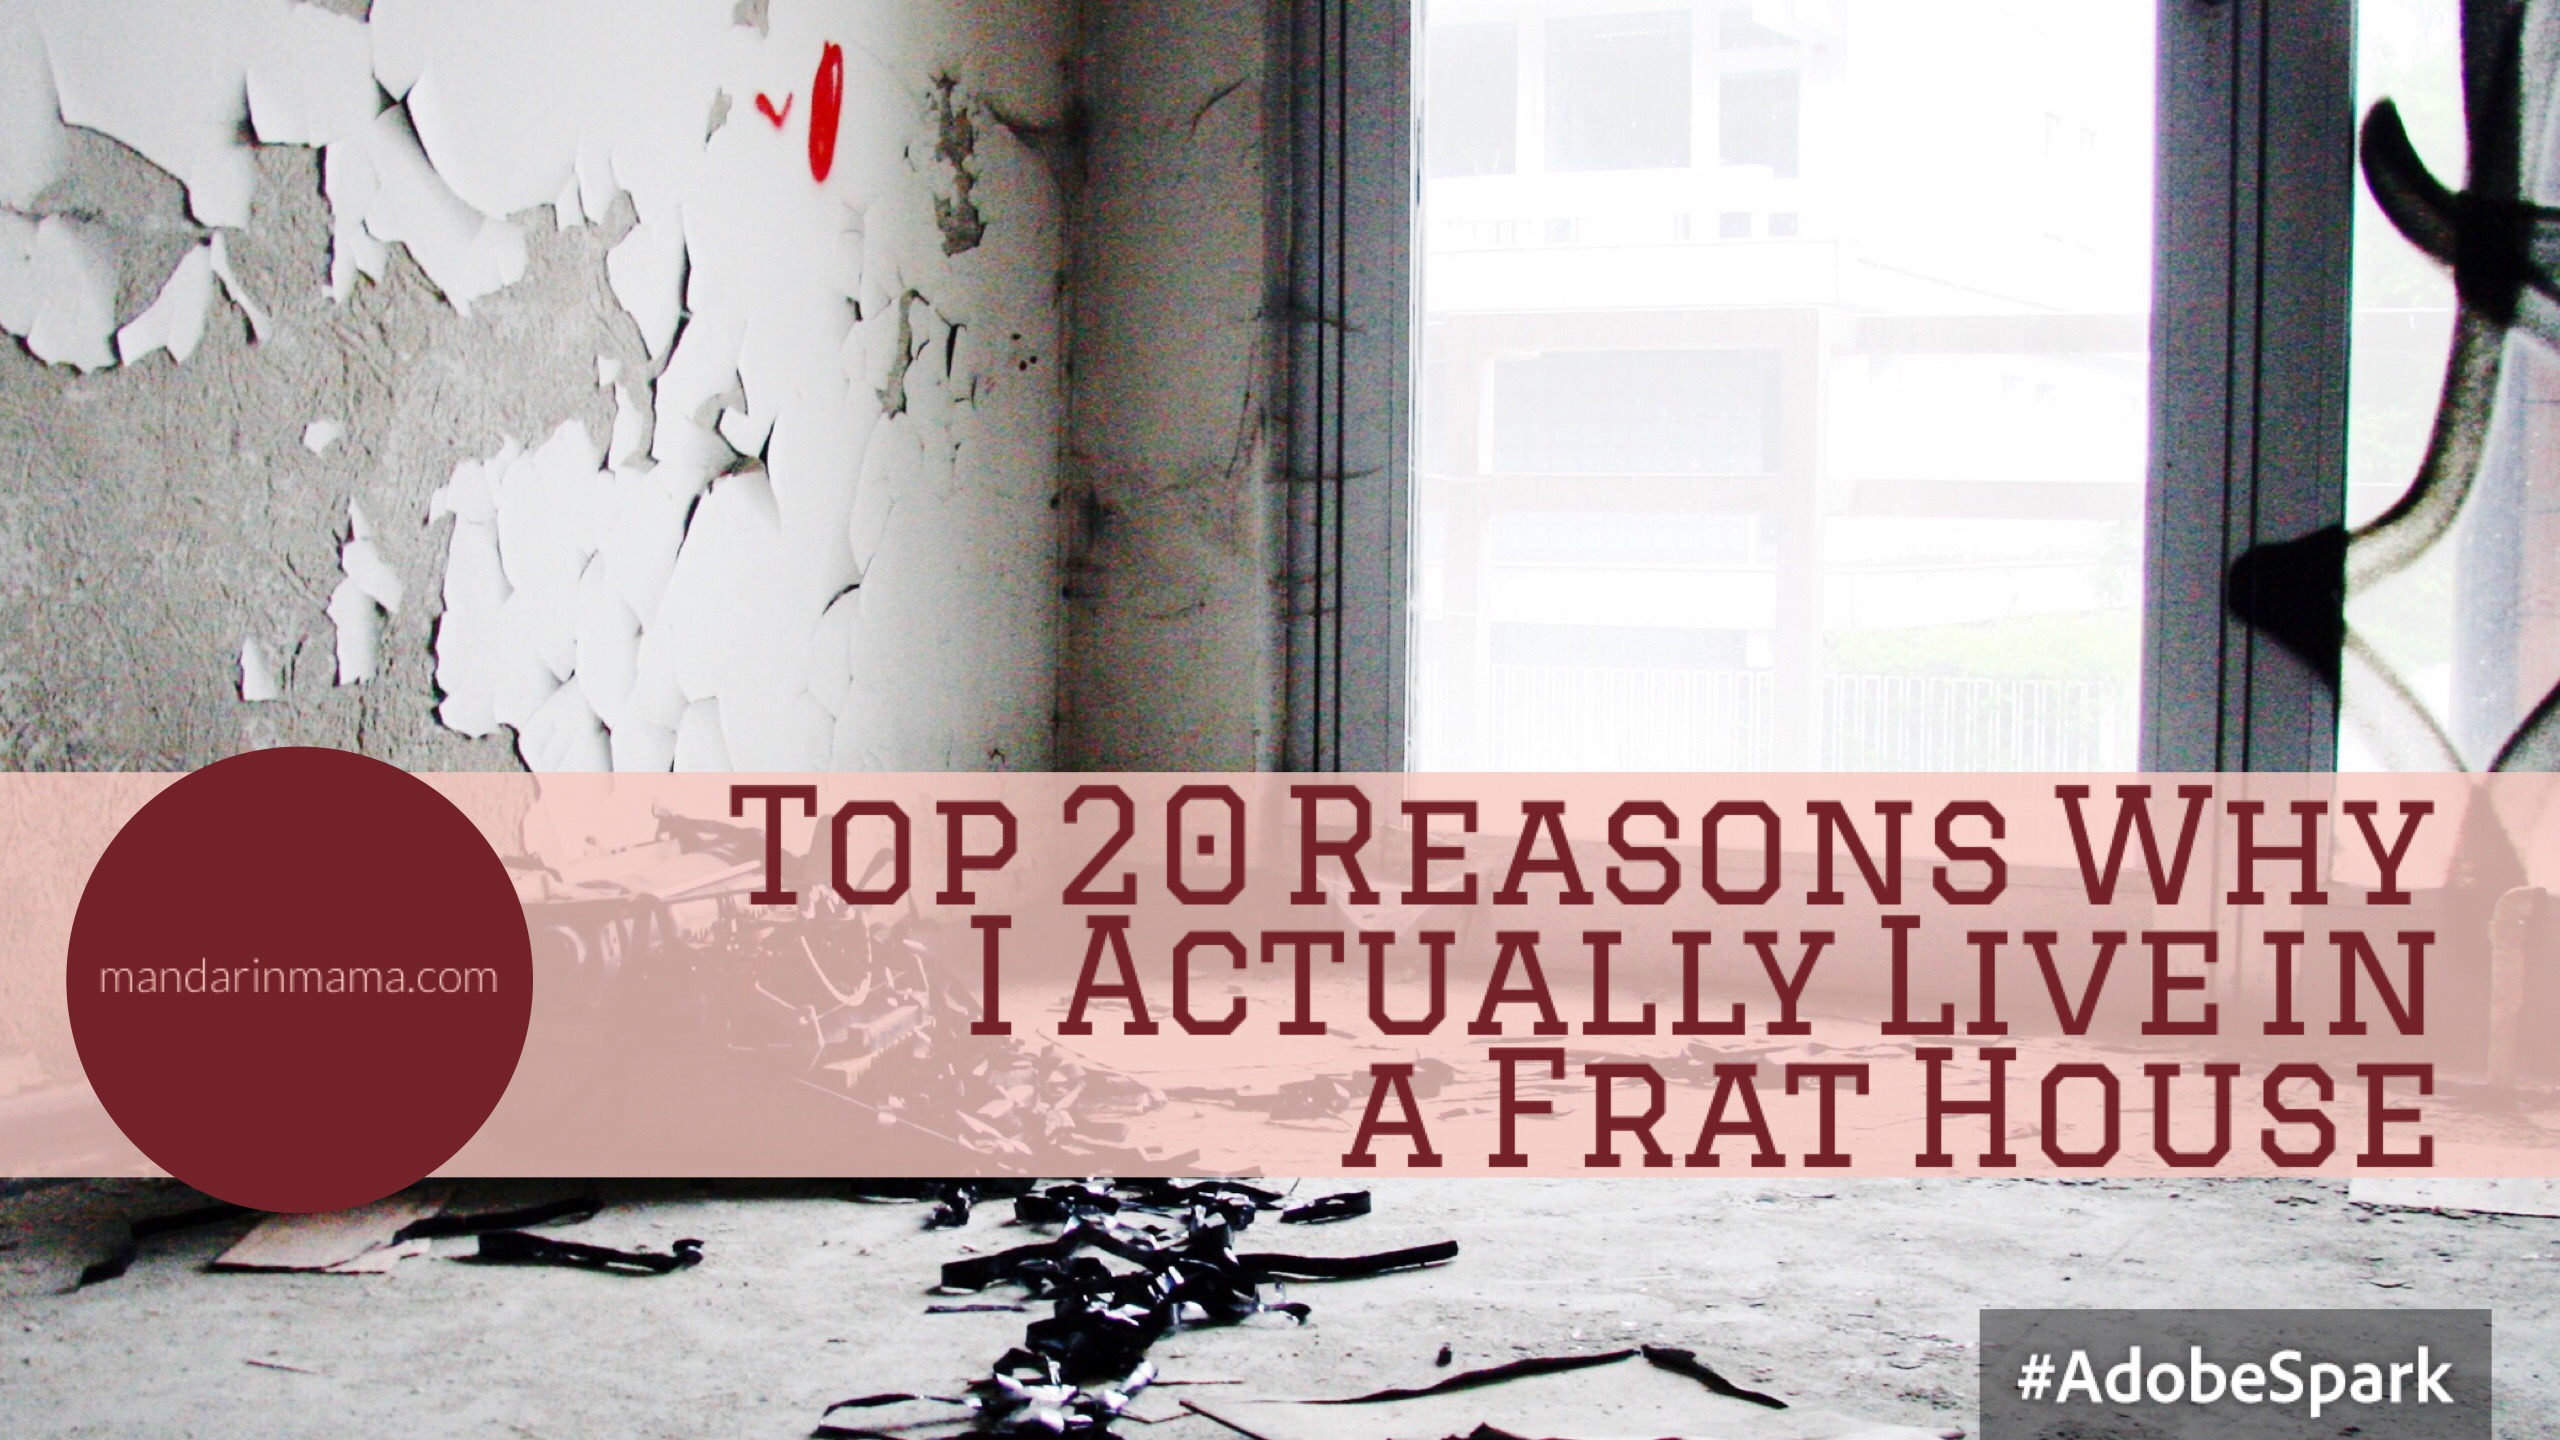 Top 20 Reasons Why I Actually Live in a Frat House